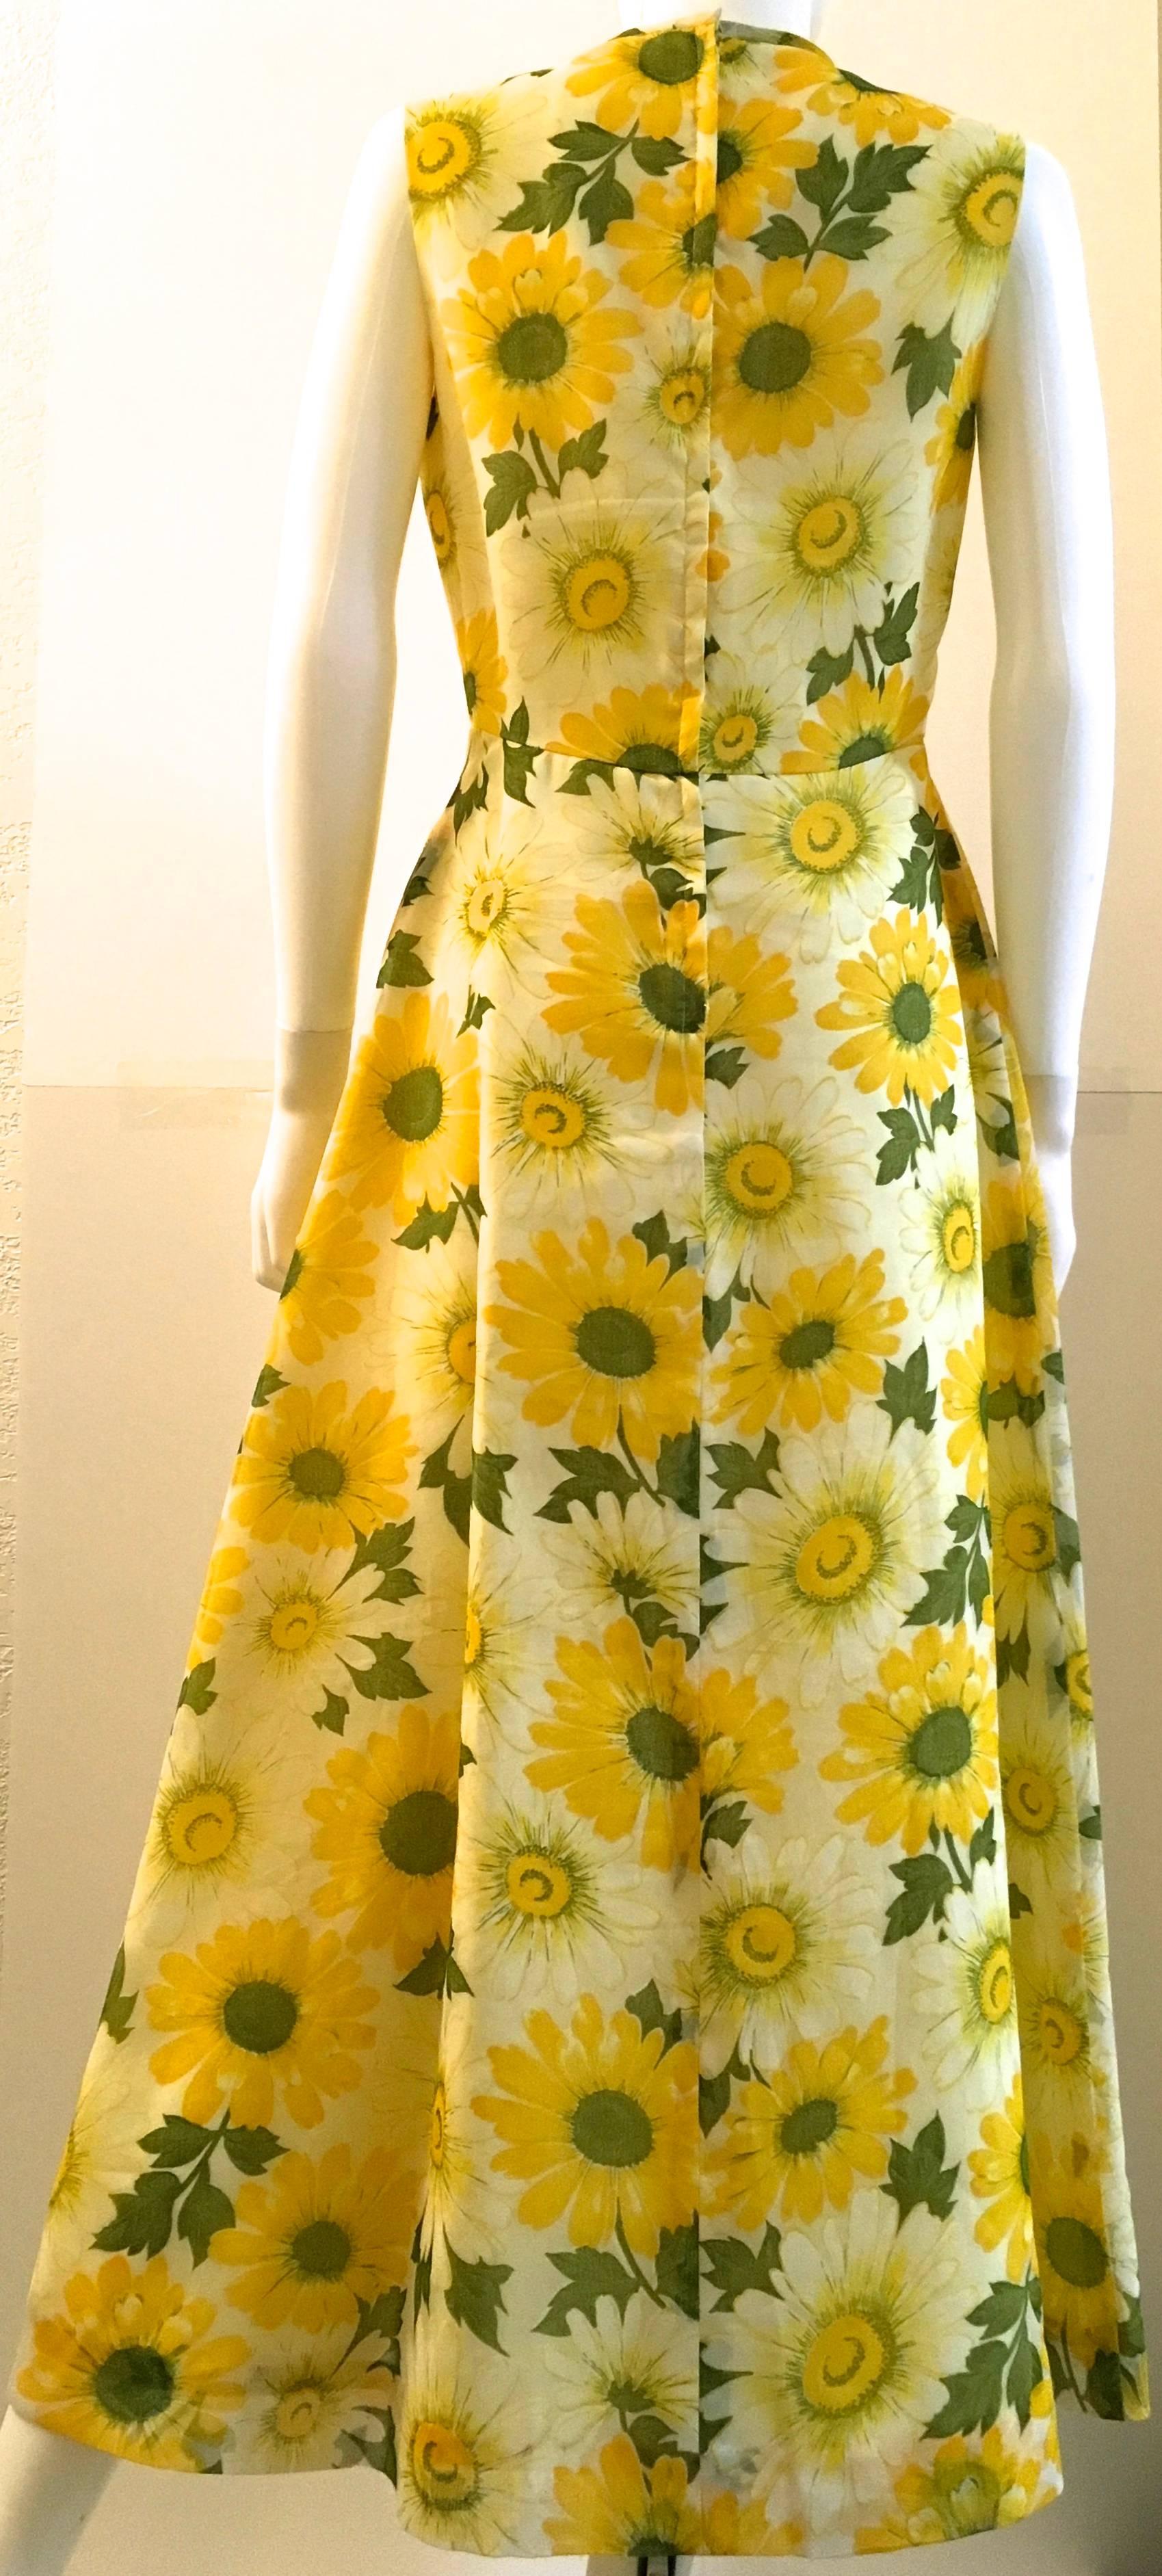 2 Piece Dress Set - Floral Print - 1970's In Excellent Condition For Sale In Boca Raton, FL